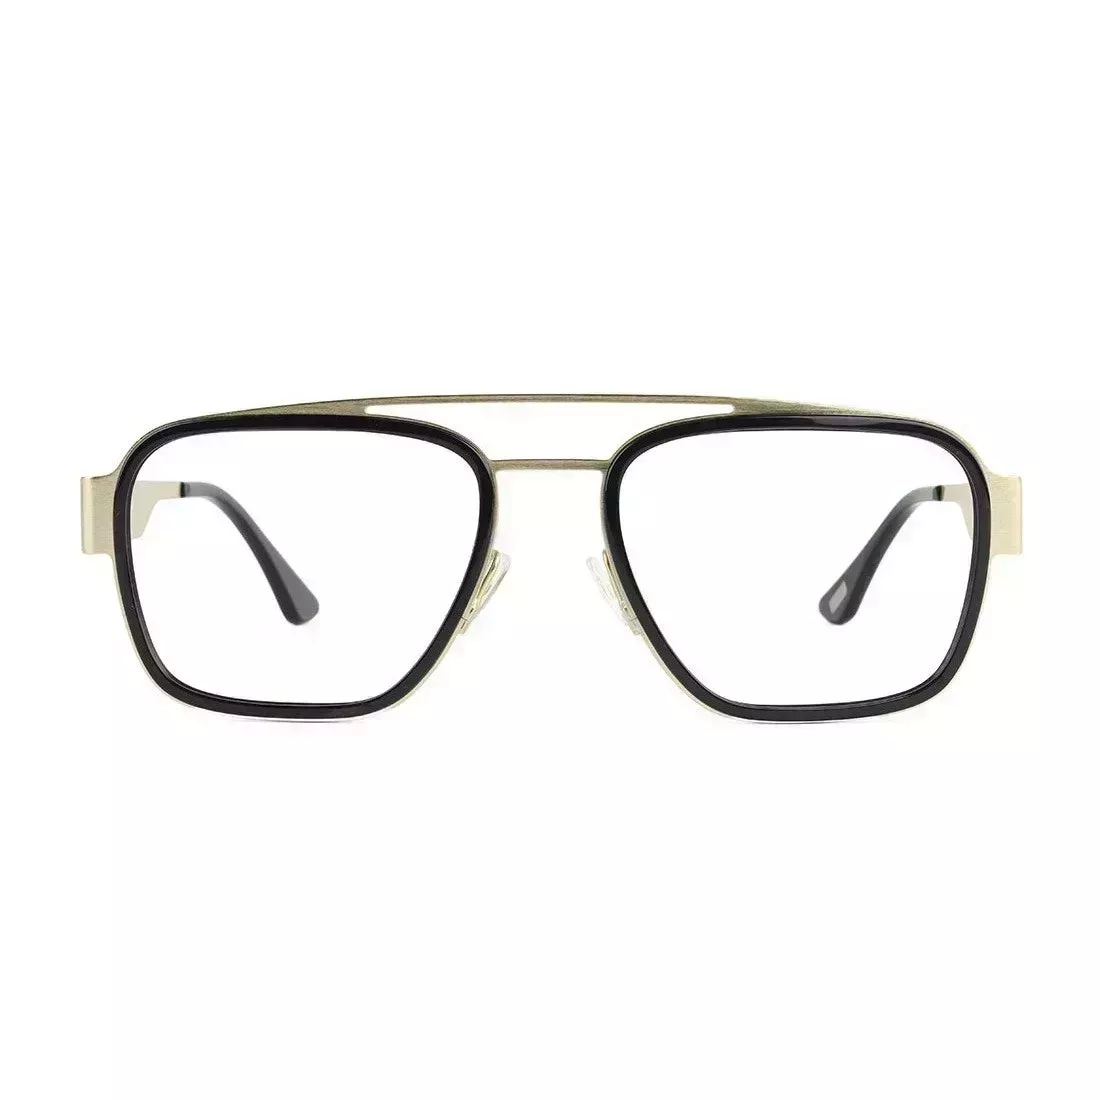 See Eyewear 6236 Sexy Specs black square aviator style glasses with gold bridge and arms on white background